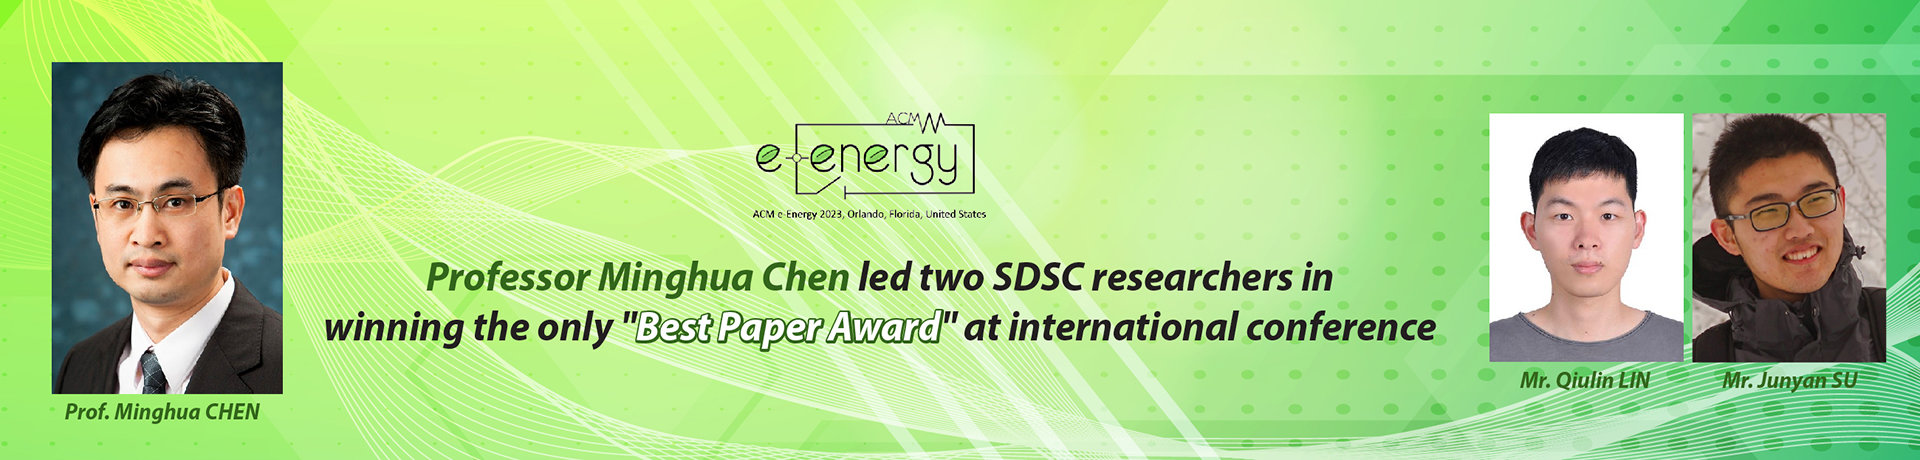 Professor Minghua CHEN led two SDSC researchers in winning the only Best Paper Award at ACM SIGEnergy premier international conference 2023